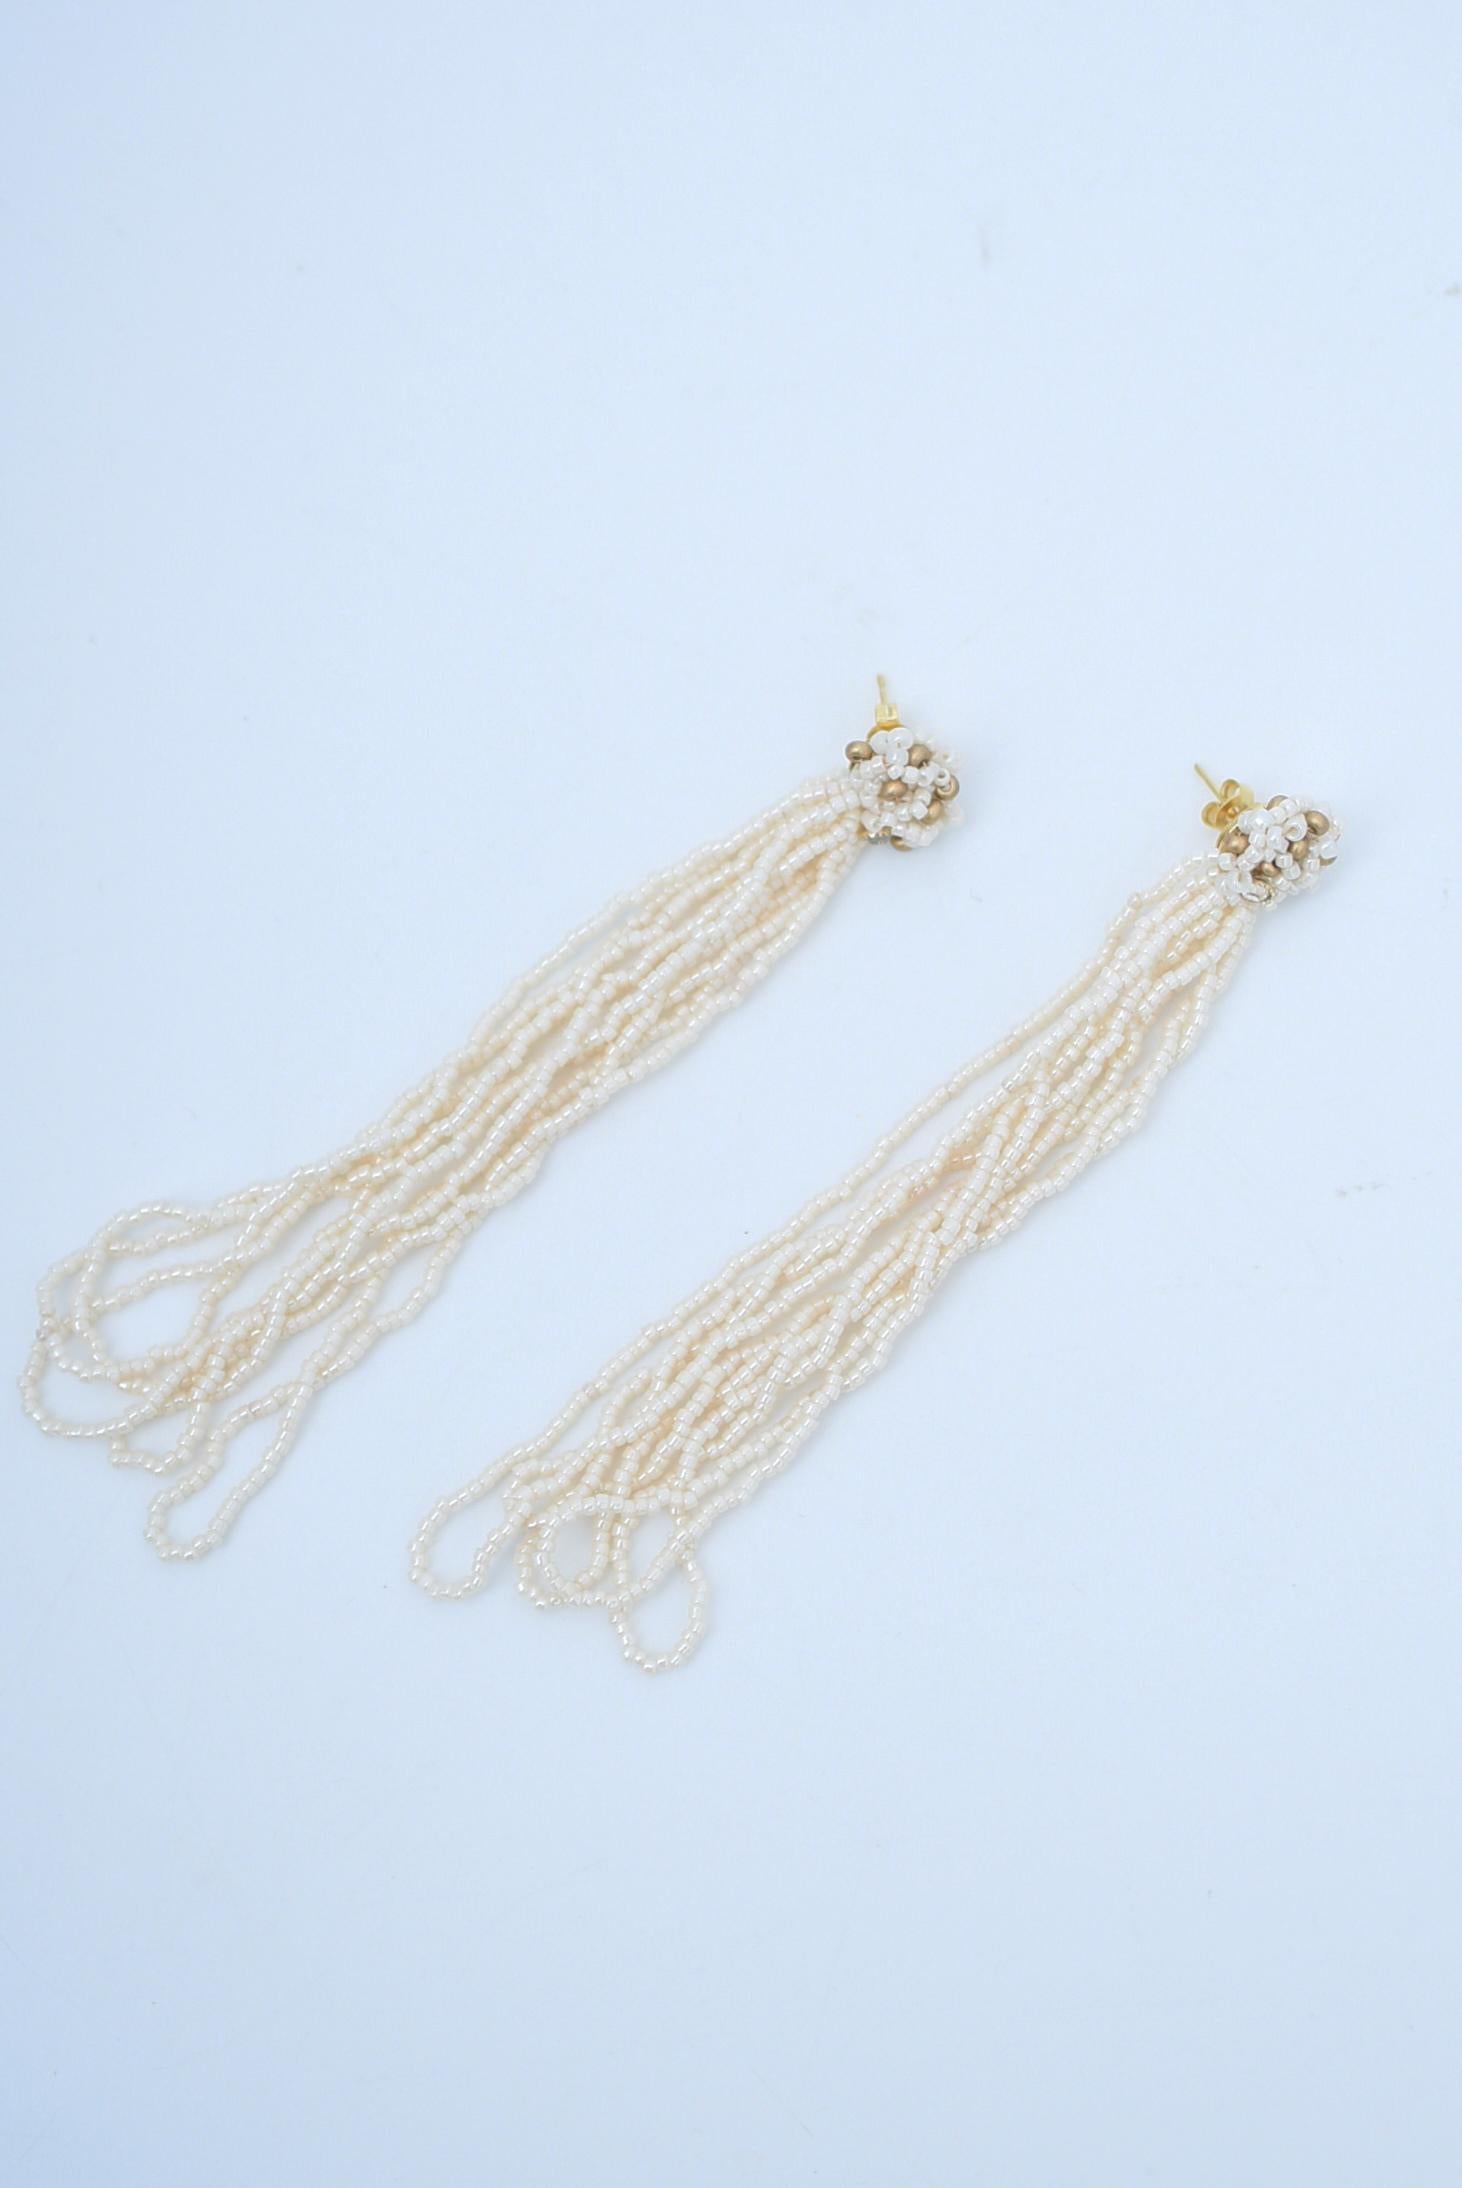 material:brass,glass beads,czech glass,swarovski glass
size:length 10cm


The earrings are made of beautifully cut beads. But when you put them on, they look surprisingly sleek.
They are very delicate and slender.
